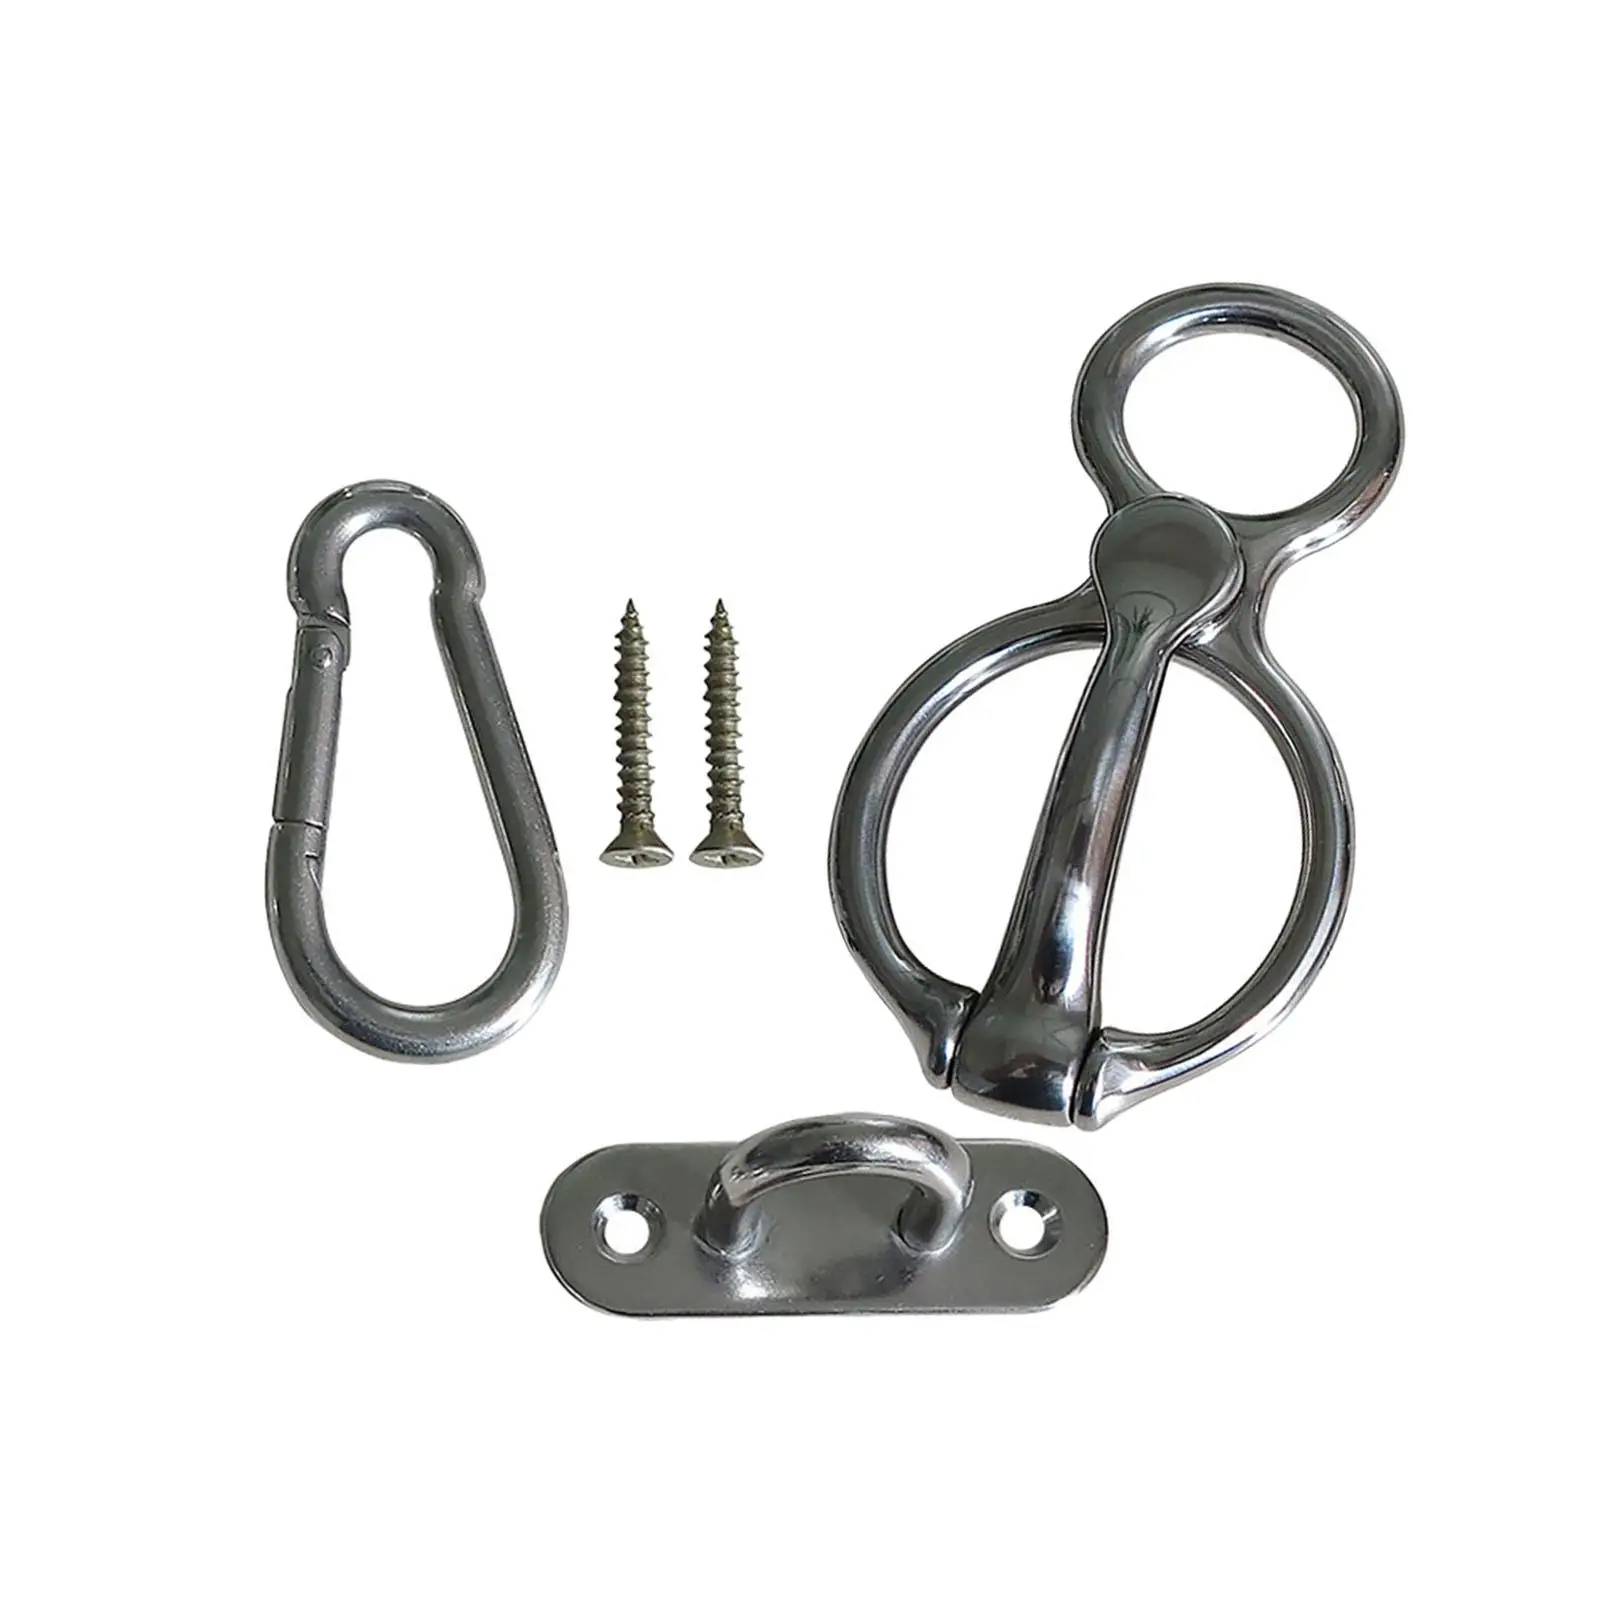 Horse Tie Ring Durable Stainless Steel Prevent Horses from Pulling Back Livestock Tie Off Training Equipment Stable Accessories